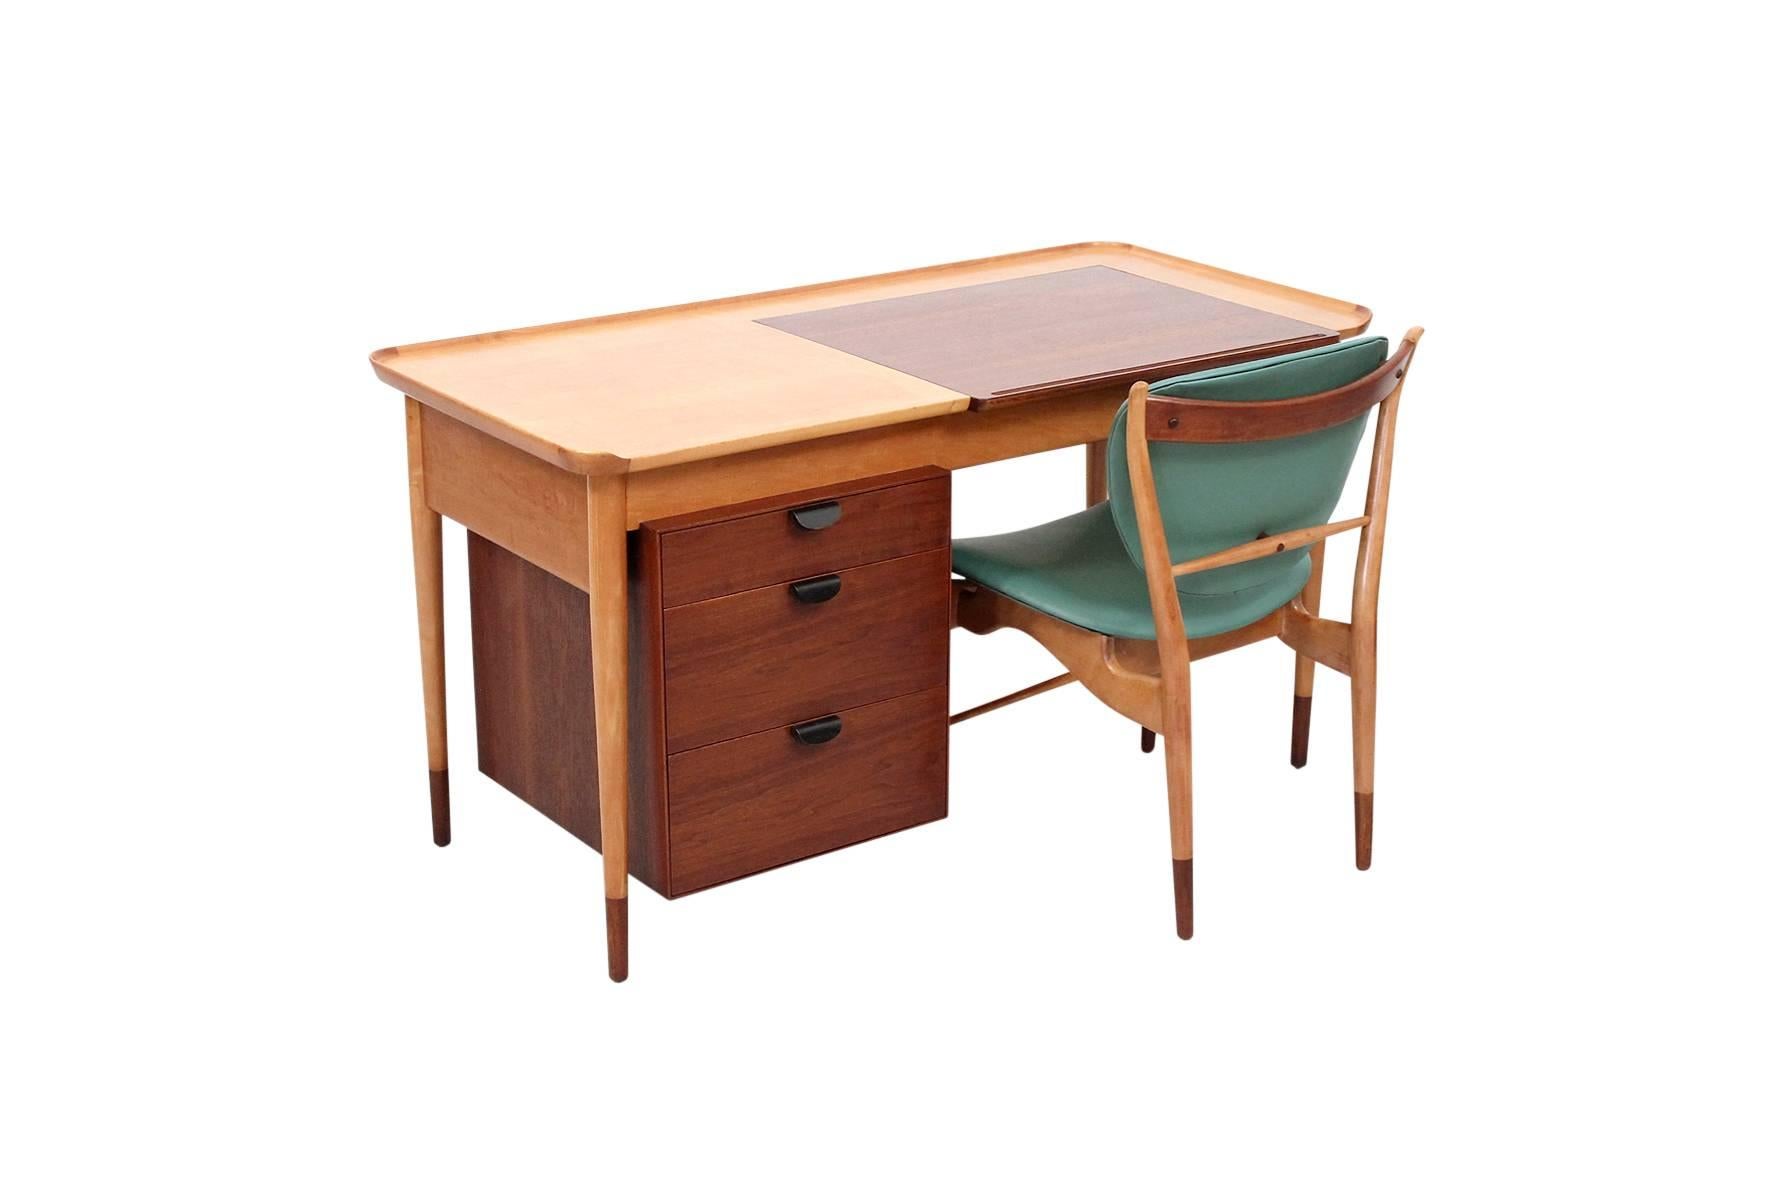 Rare desk or vanity with matching chair designed by Finn Juhl for Baker in 1951. Desk and chair both executed in a combination of walnut and beech. This desk design called by Finn Juhl 